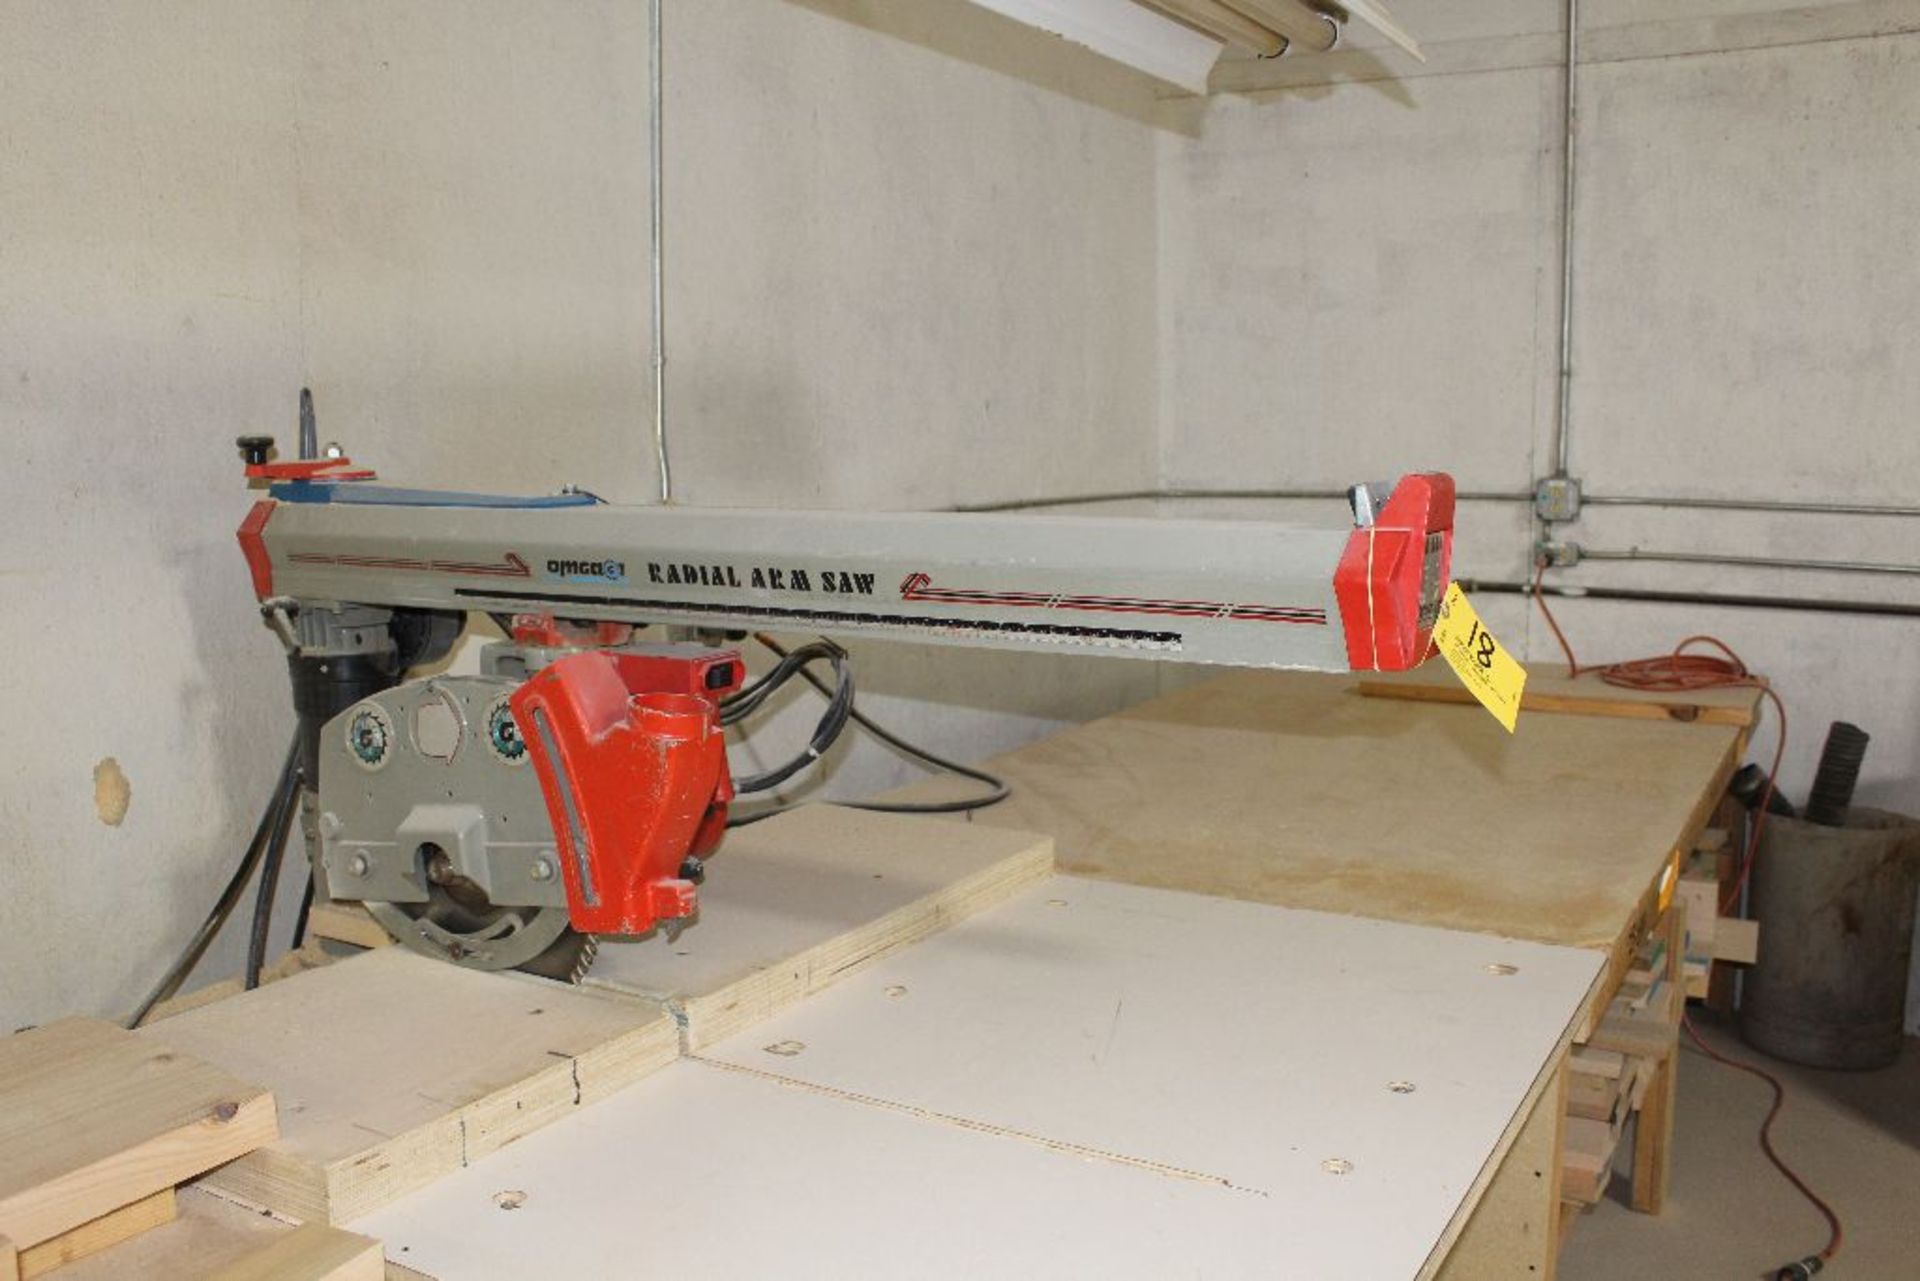 OMGAGA radial arm saw, model RN900, sn 20306, 5 hp., w/47" x 179" lay off table, voltage 230/460. - Image 4 of 8